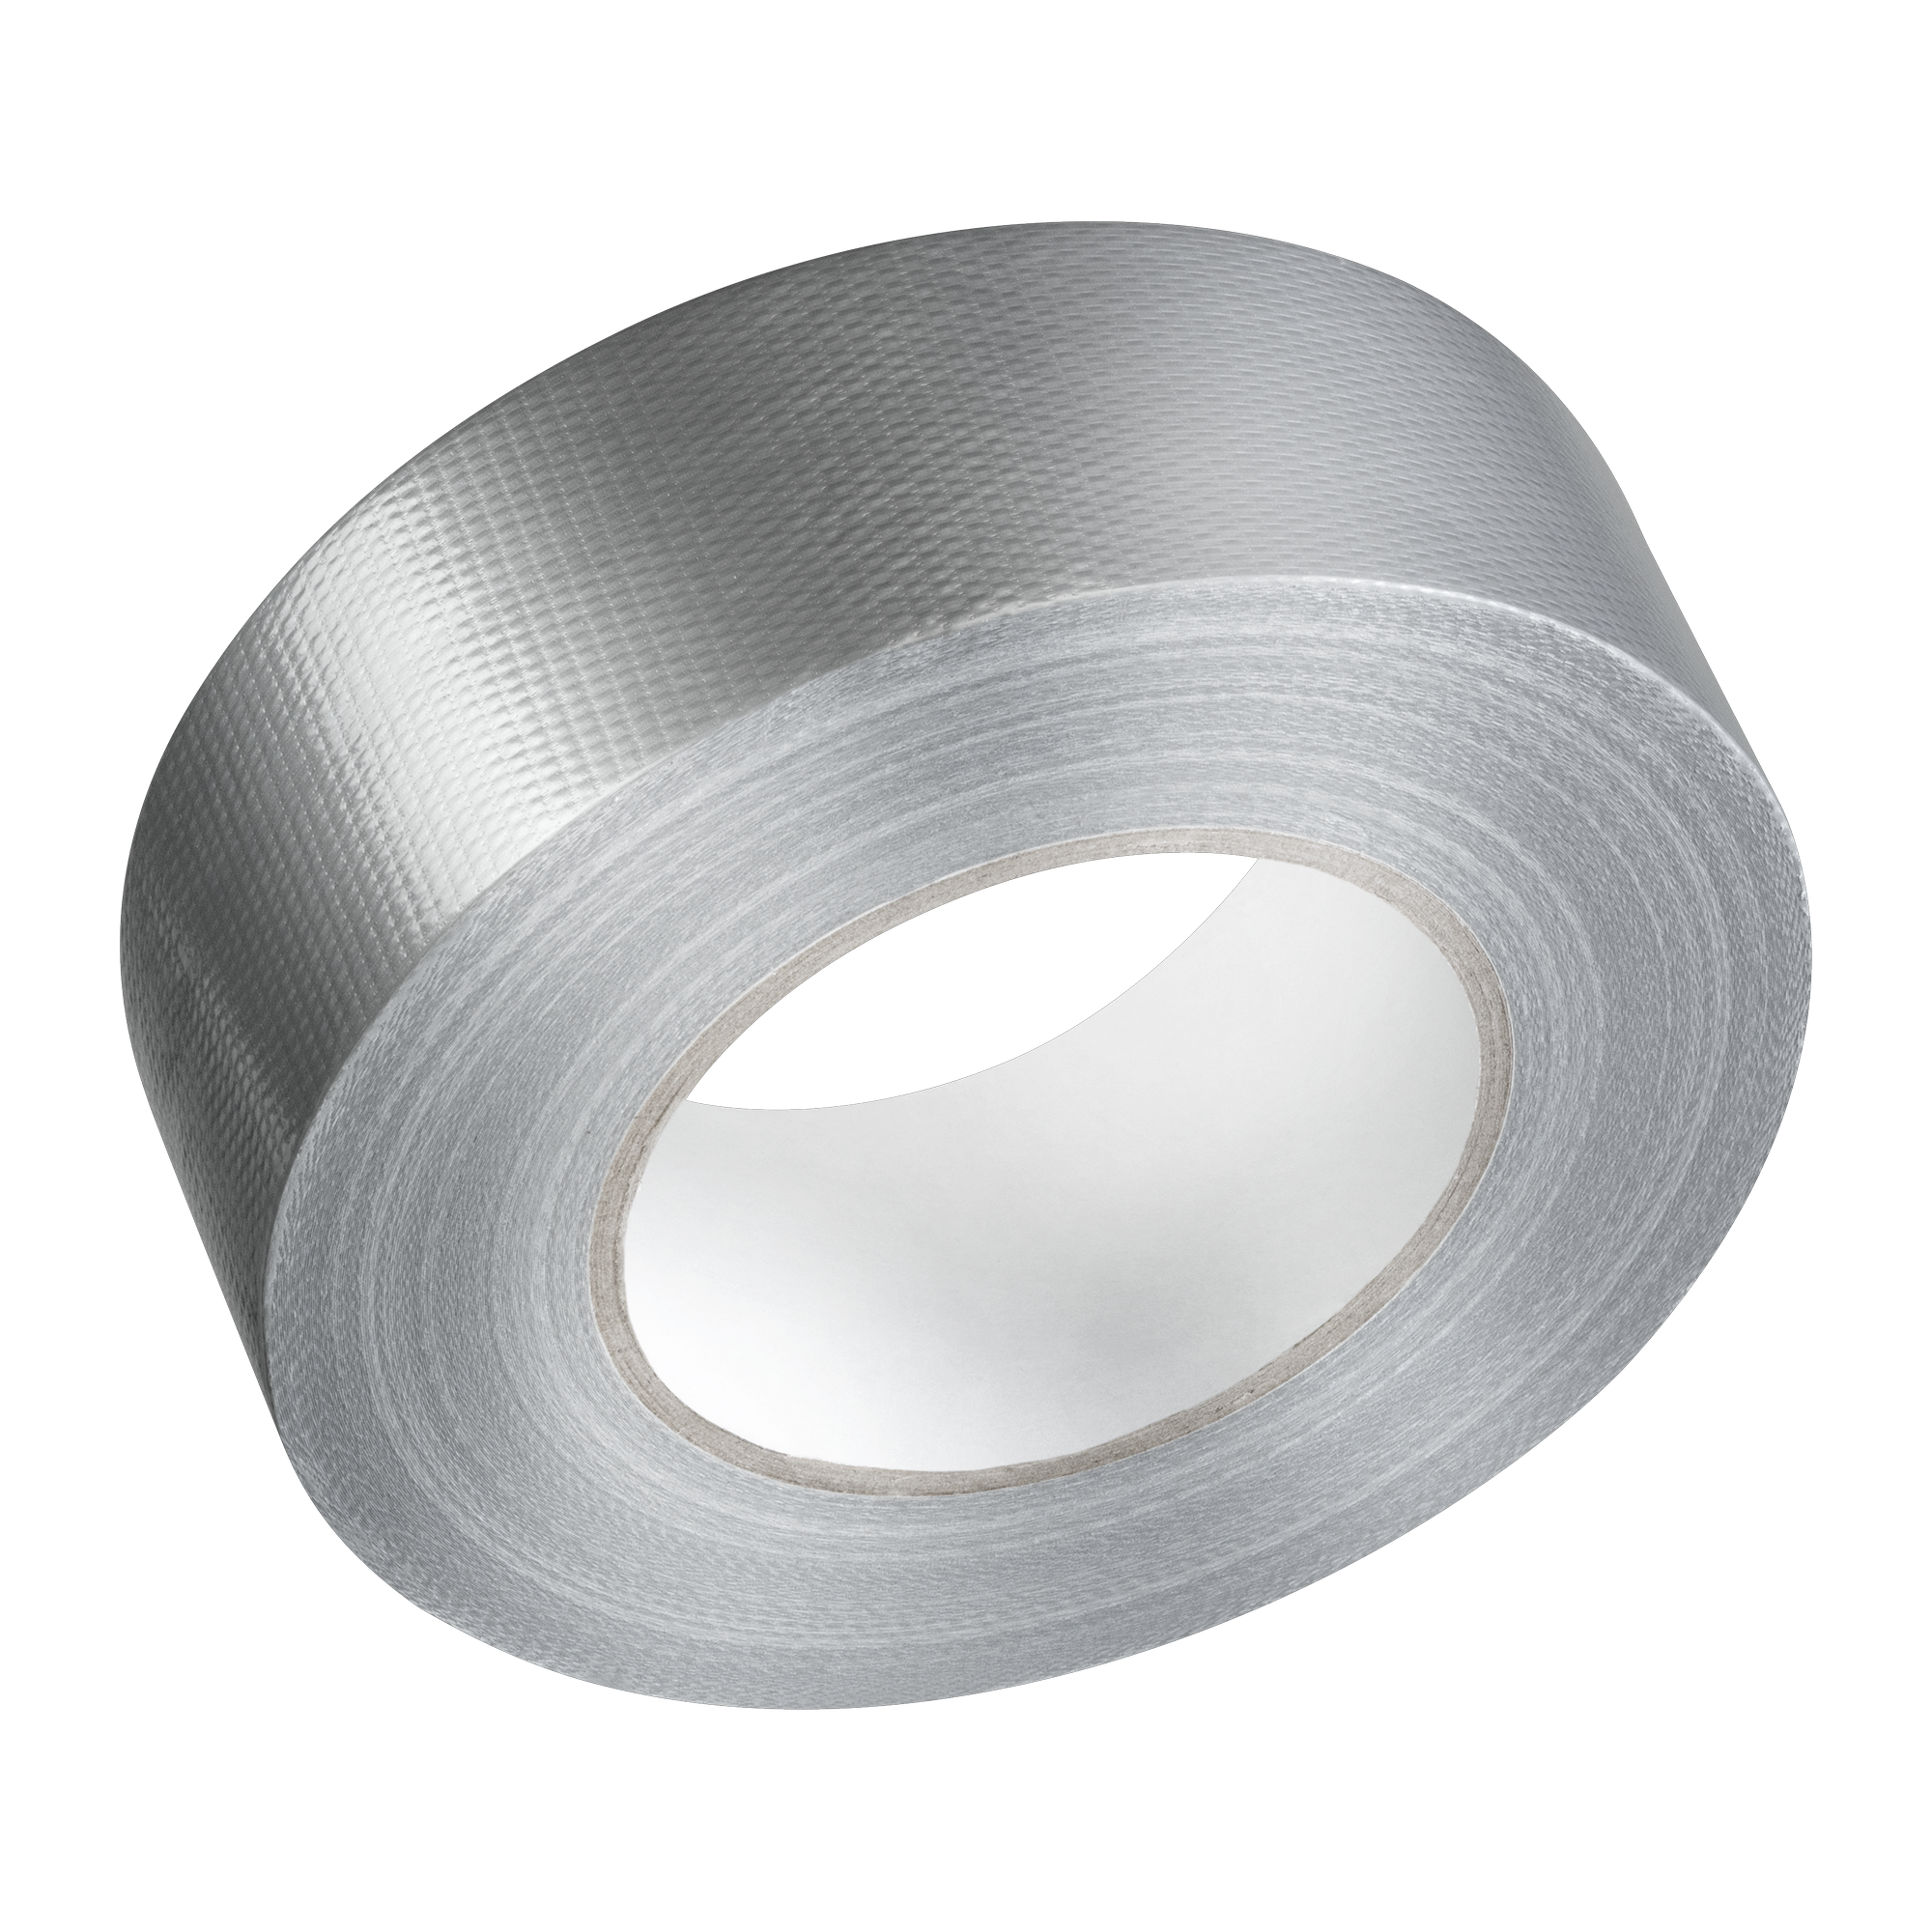 Reparaturband extra stark silber 48 mm x 50 m + product picture